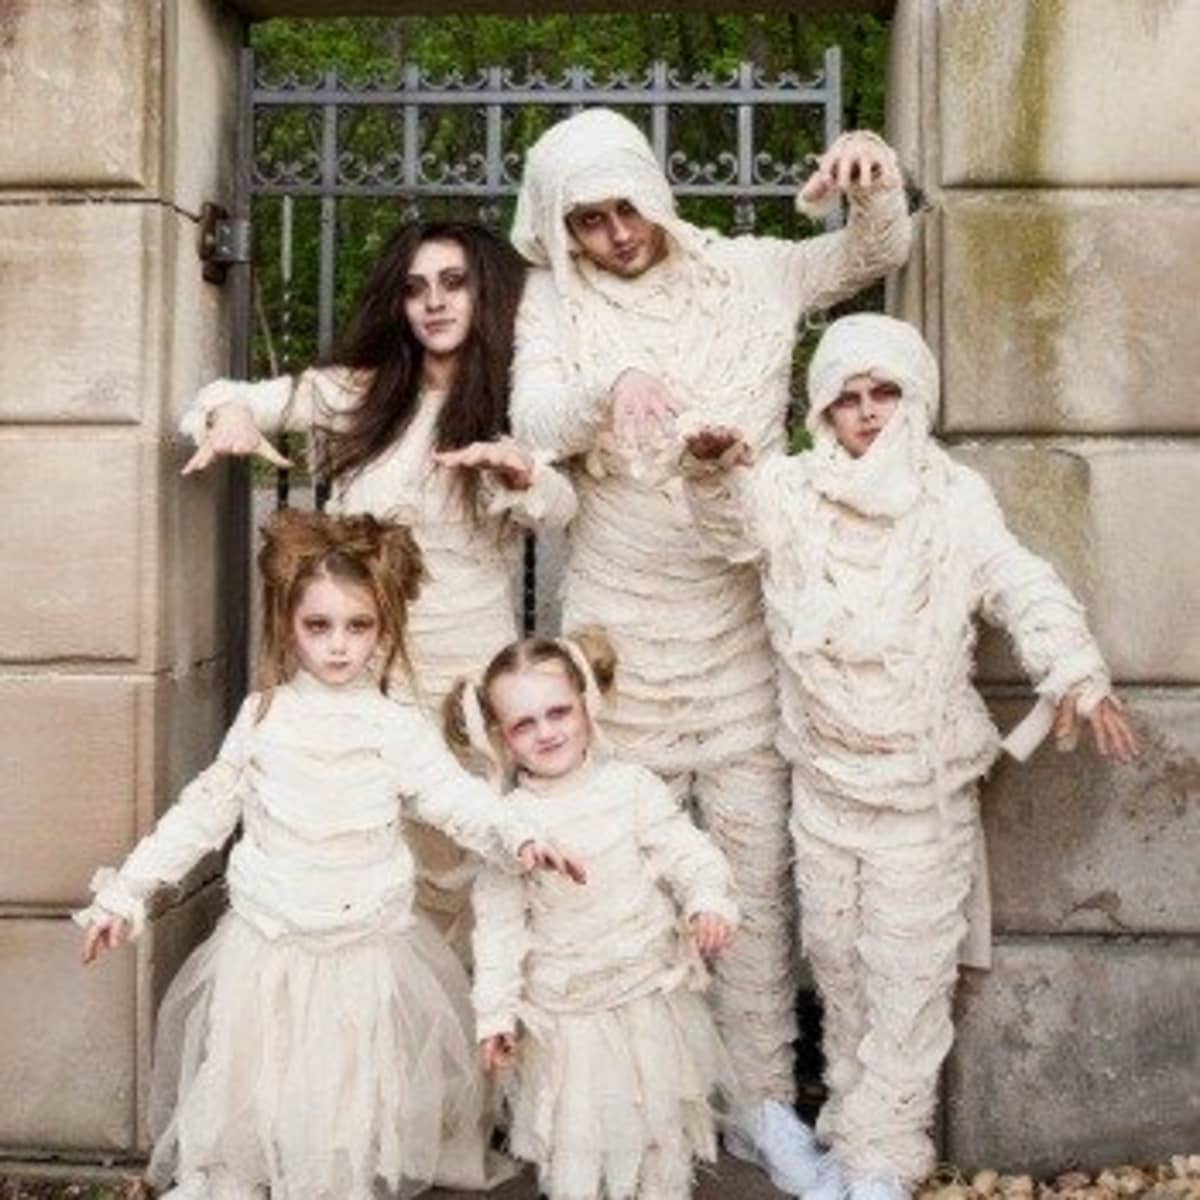 How to Make a DIY Mummy Costume for Halloween